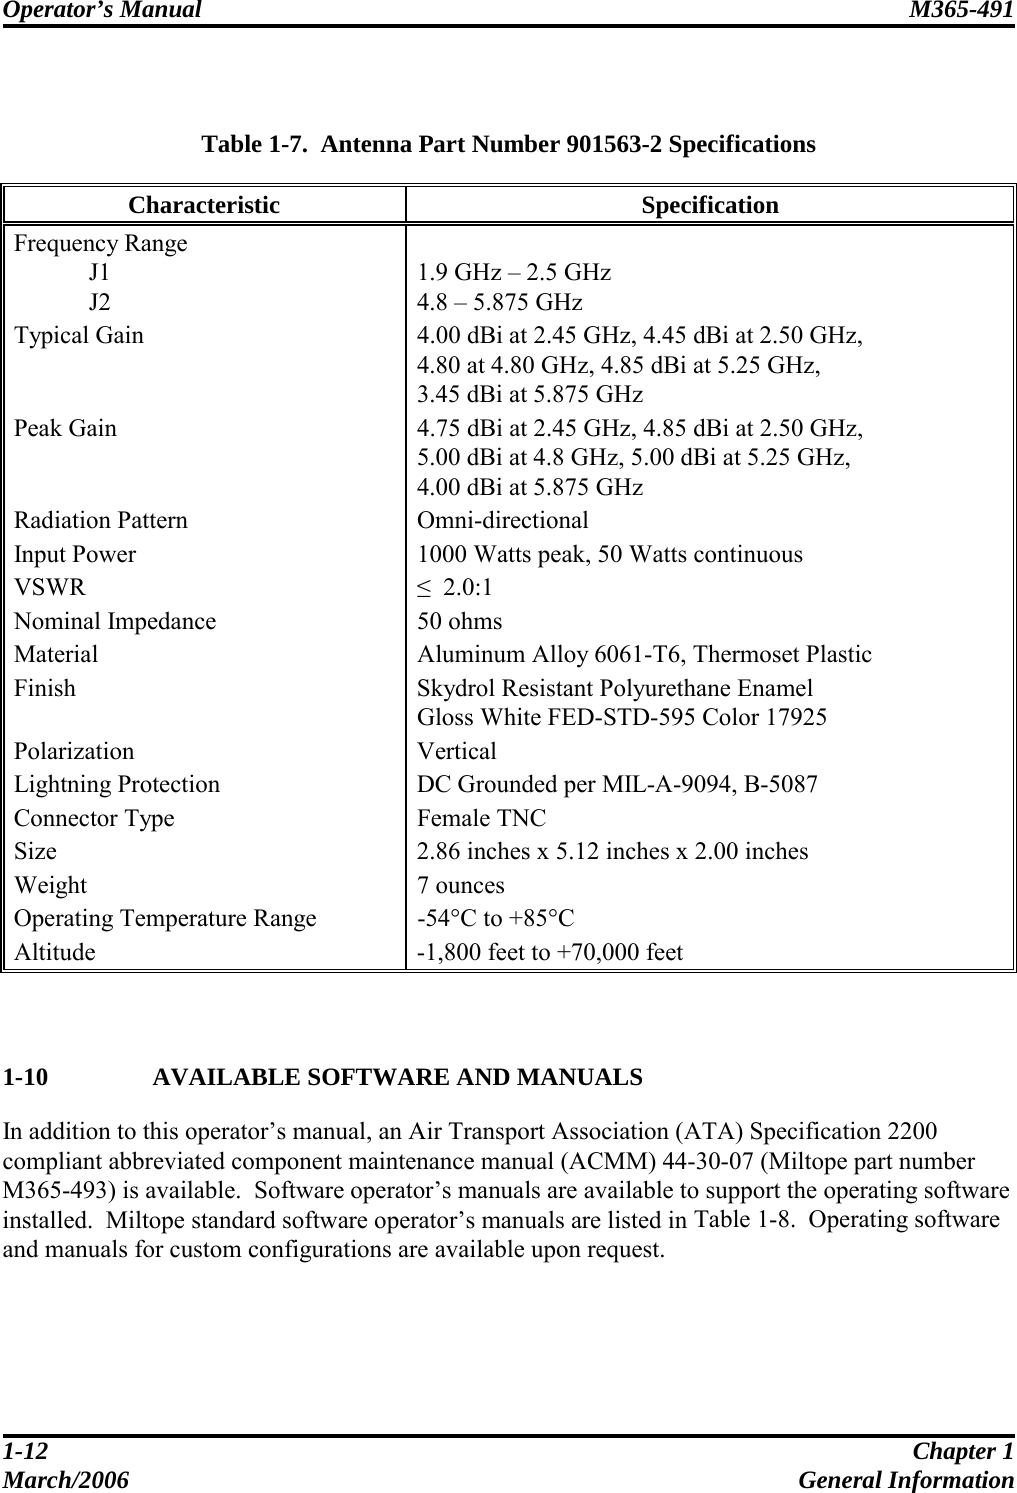 Operator’s Manual  M365-491   1-12  Chapter 1 March/2006 General Information   Table 1-7.  Antenna Part Number 901563-2 Specifications Characteristic Specification Frequency Range  J1  J2  1.9 GHz – 2.5 GHz 4.8 – 5.875 GHz Typical Gain  4.00 dBi at 2.45 GHz, 4.45 dBi at 2.50 GHz,  4.80 at 4.80 GHz, 4.85 dBi at 5.25 GHz,  3.45 dBi at 5.875 GHz Peak Gain  4.75 dBi at 2.45 GHz, 4.85 dBi at 2.50 GHz,  5.00 dBi at 4.8 GHz, 5.00 dBi at 5.25 GHz,  4.00 dBi at 5.875 GHz Radiation Pattern  Omni-directional Input Power  1000 Watts peak, 50 Watts continuous VSWR  ≤  2.0:1 Nominal Impedance  50 ohms Material Aluminum Alloy 6061-T6, Thermoset Plastic Finish  Skydrol Resistant Polyurethane Enamel Gloss White FED-STD-595 Color 17925 Polarization Vertical Lightning Protection  DC Grounded per MIL-A-9094, B-5087 Connector Type  Female TNC Size  2.86 inches x 5.12 inches x 2.00 inches Weight 7 ounces Operating Temperature Range  -54°C to +85°C Altitude  -1,800 feet to +70,000 feet    1-10   AVAILABLE SOFTWARE AND MANUALS In addition to this operator’s manual, an Air Transport Association (ATA) Specification 2200 compliant abbreviated component maintenance manual (ACMM) 44-30-07 (Miltope part number M365-493) is available.  Software operator’s manuals are available to support the operating software installed.  Miltope standard software operator’s manuals are listed in Table 1-8.  Operating software and manuals for custom configurations are available upon request.  